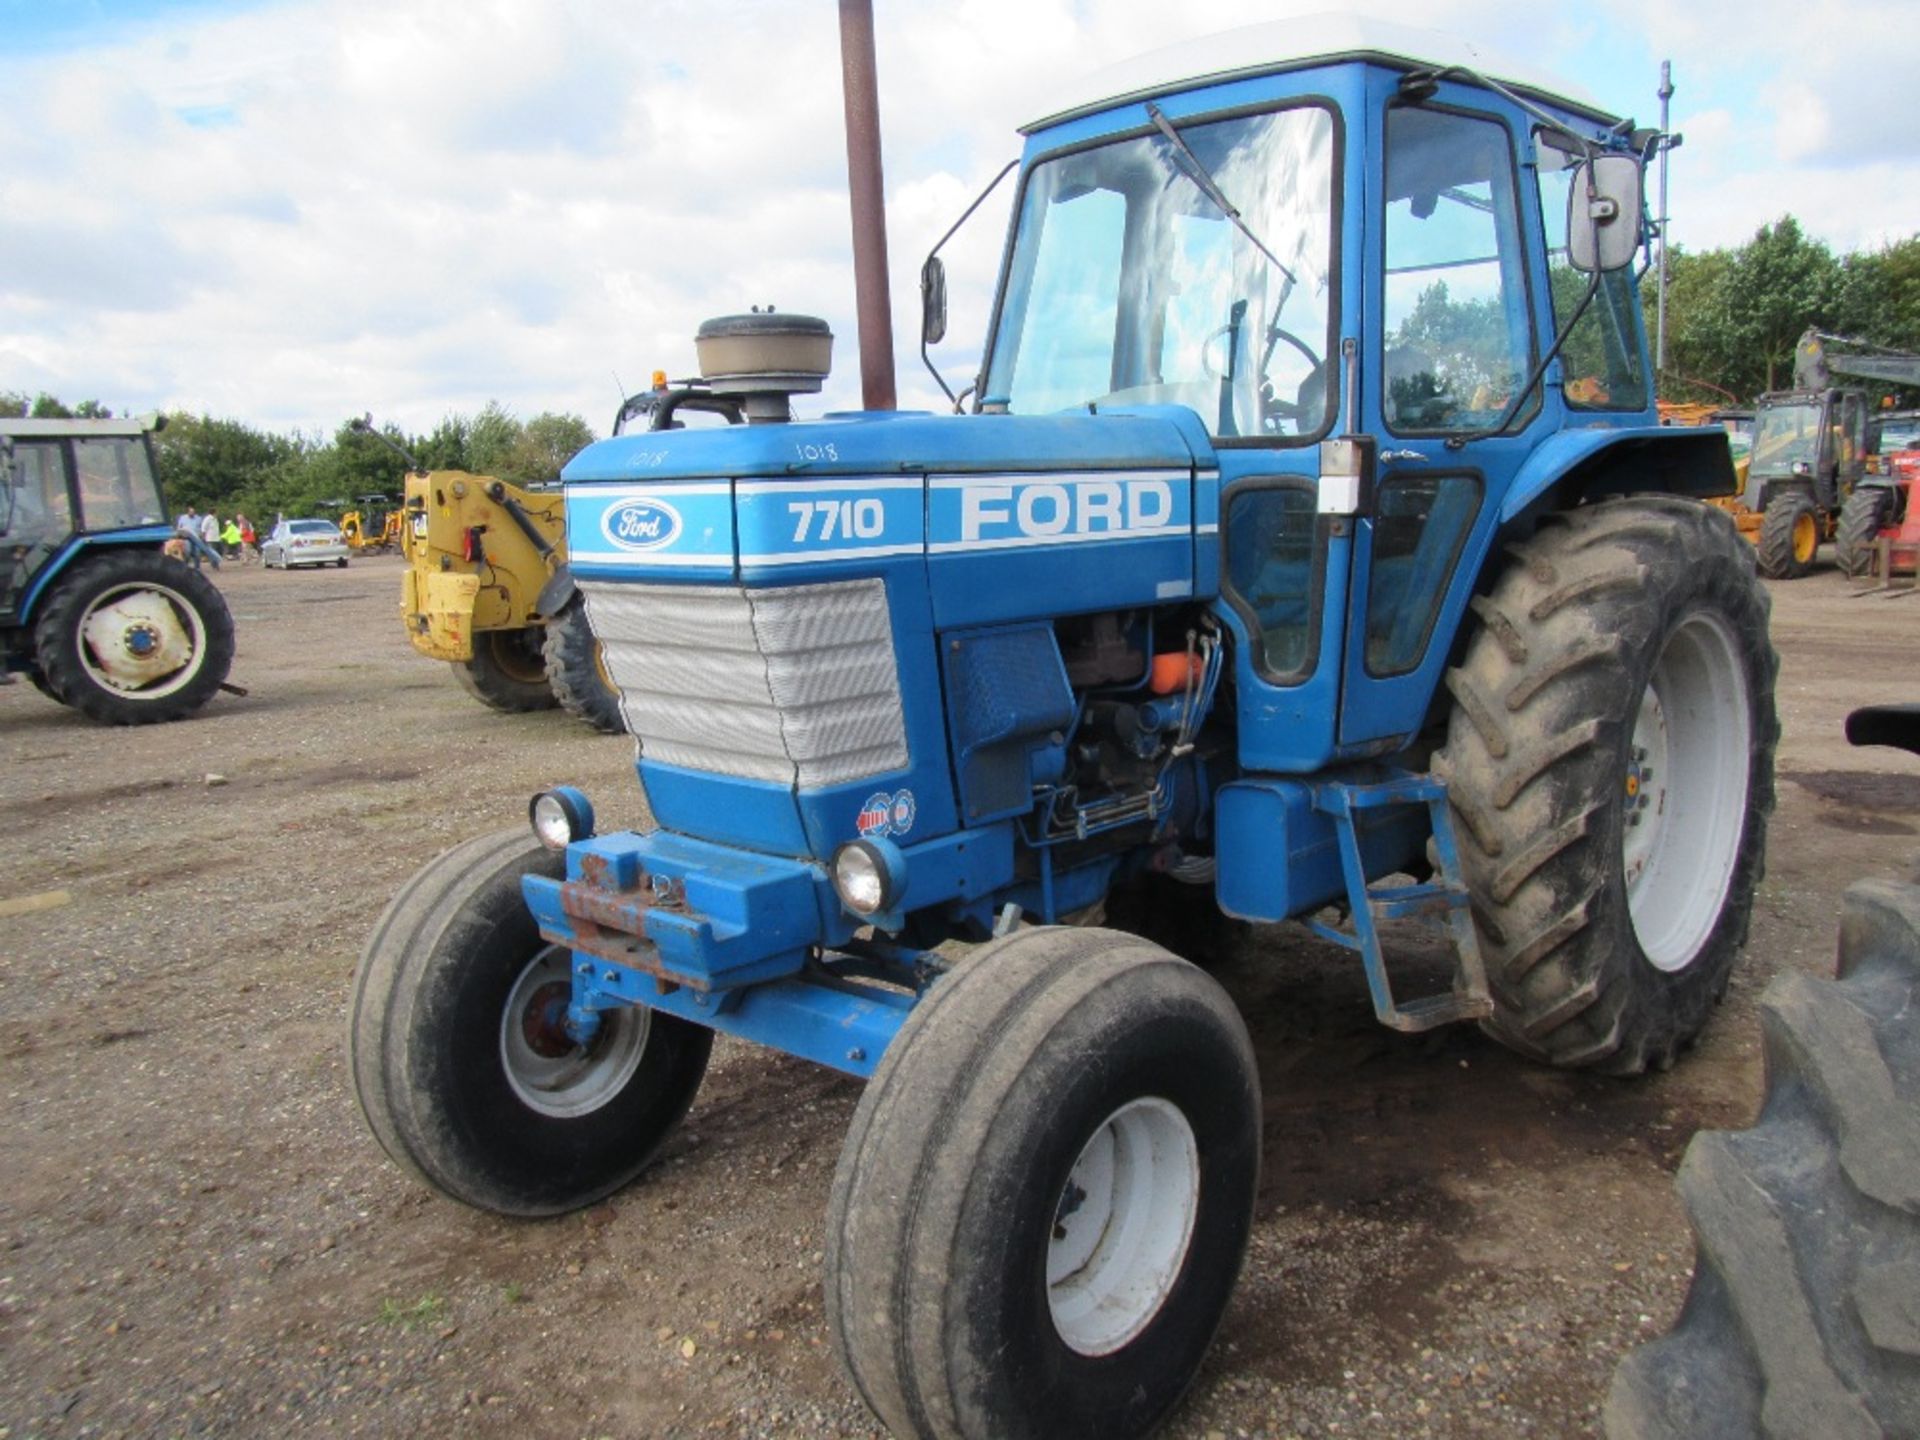 Ford 7710 2wd Tractor. Ser. No. B400597